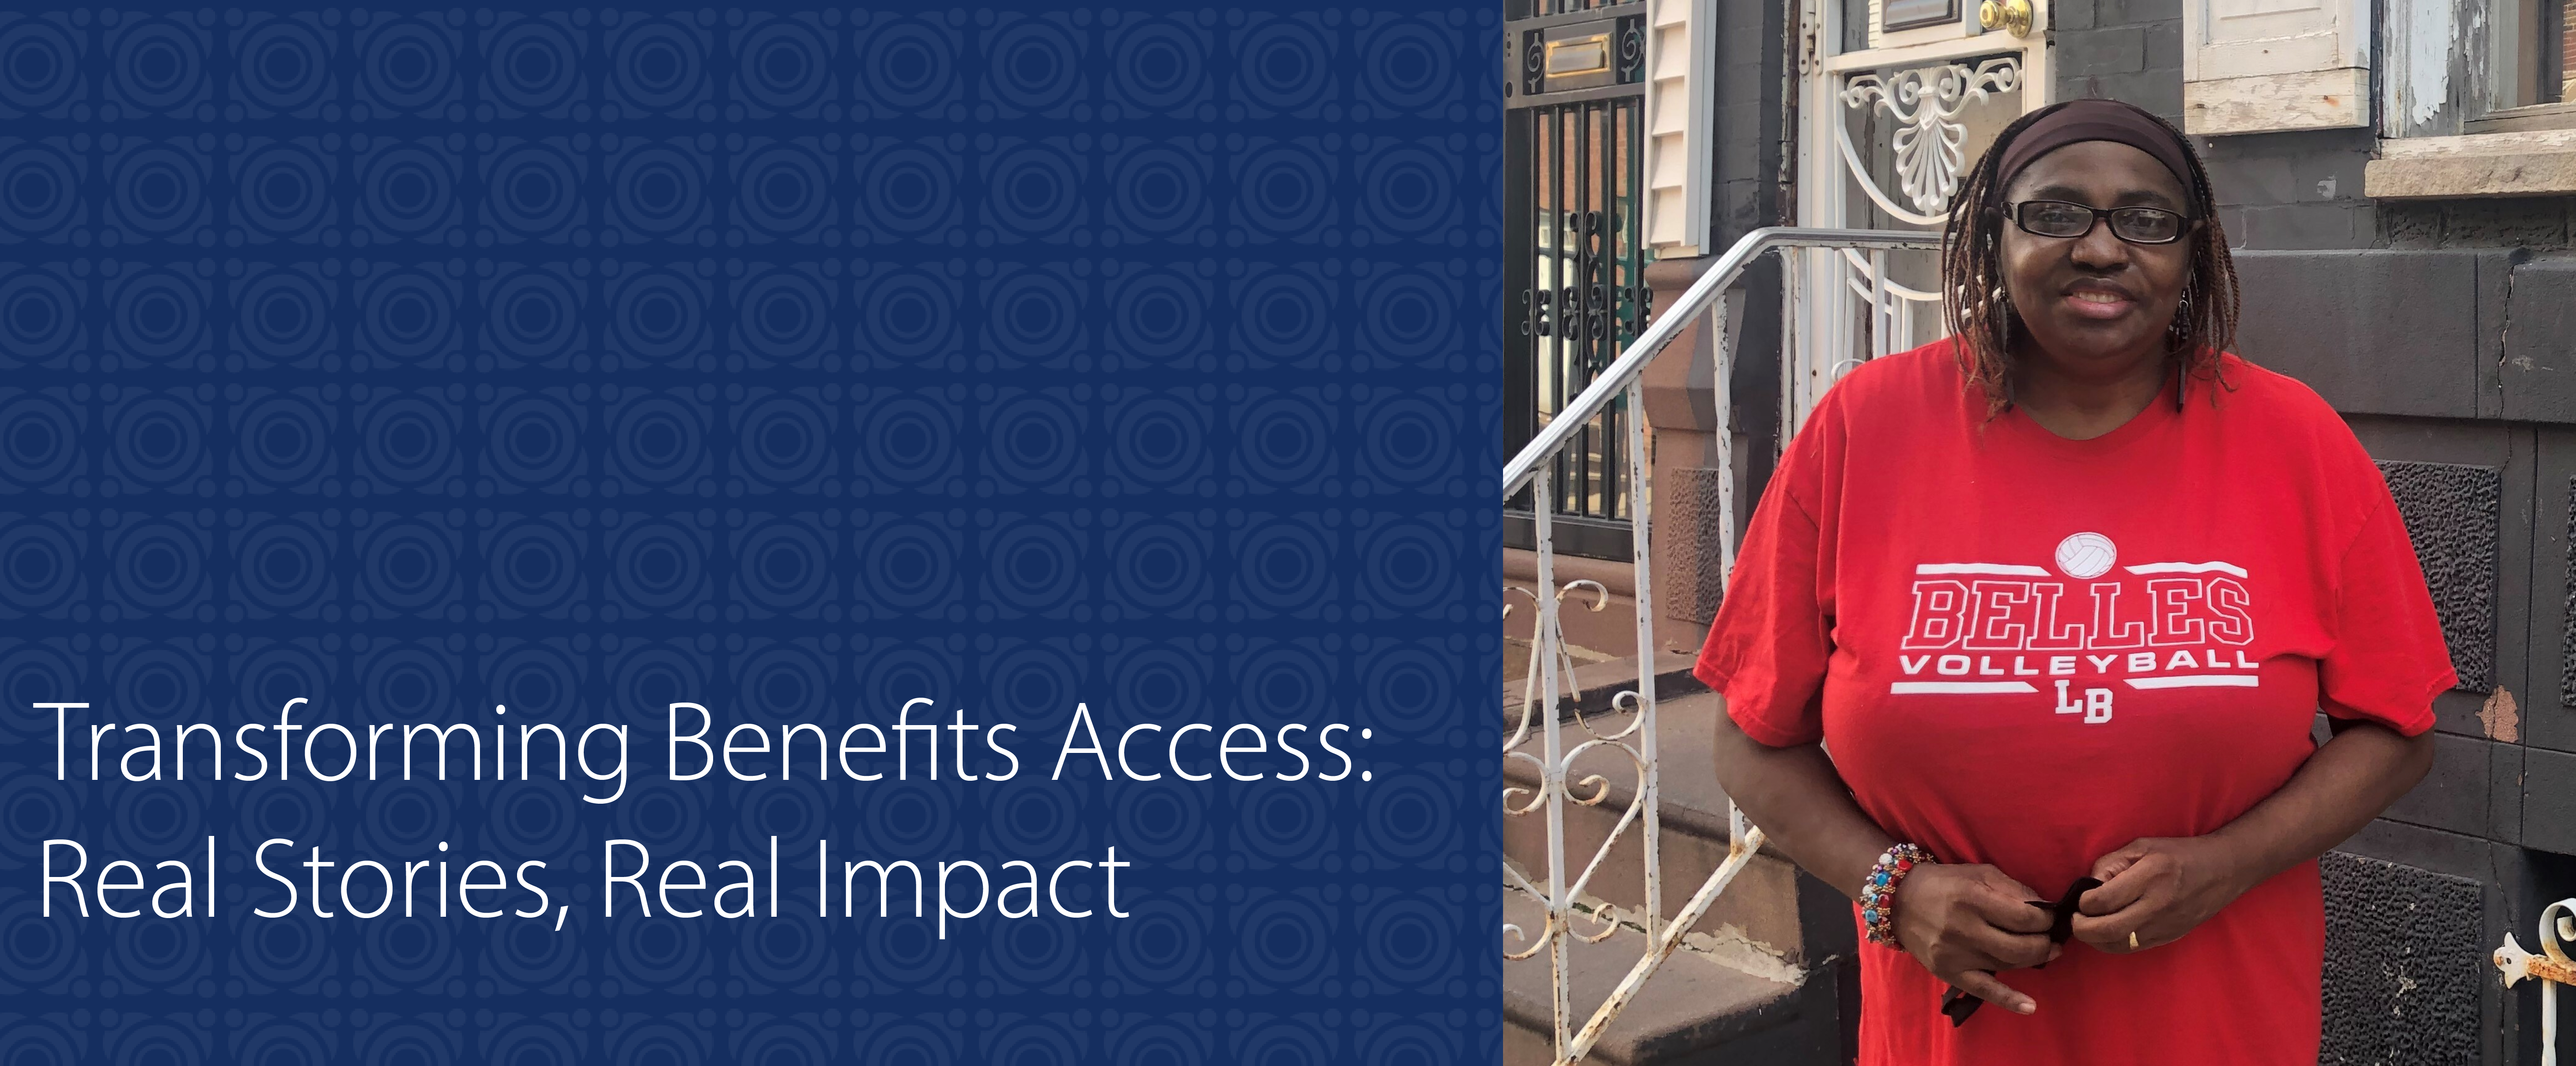 Transforming Benefits Access: Real Stories, Real Impact